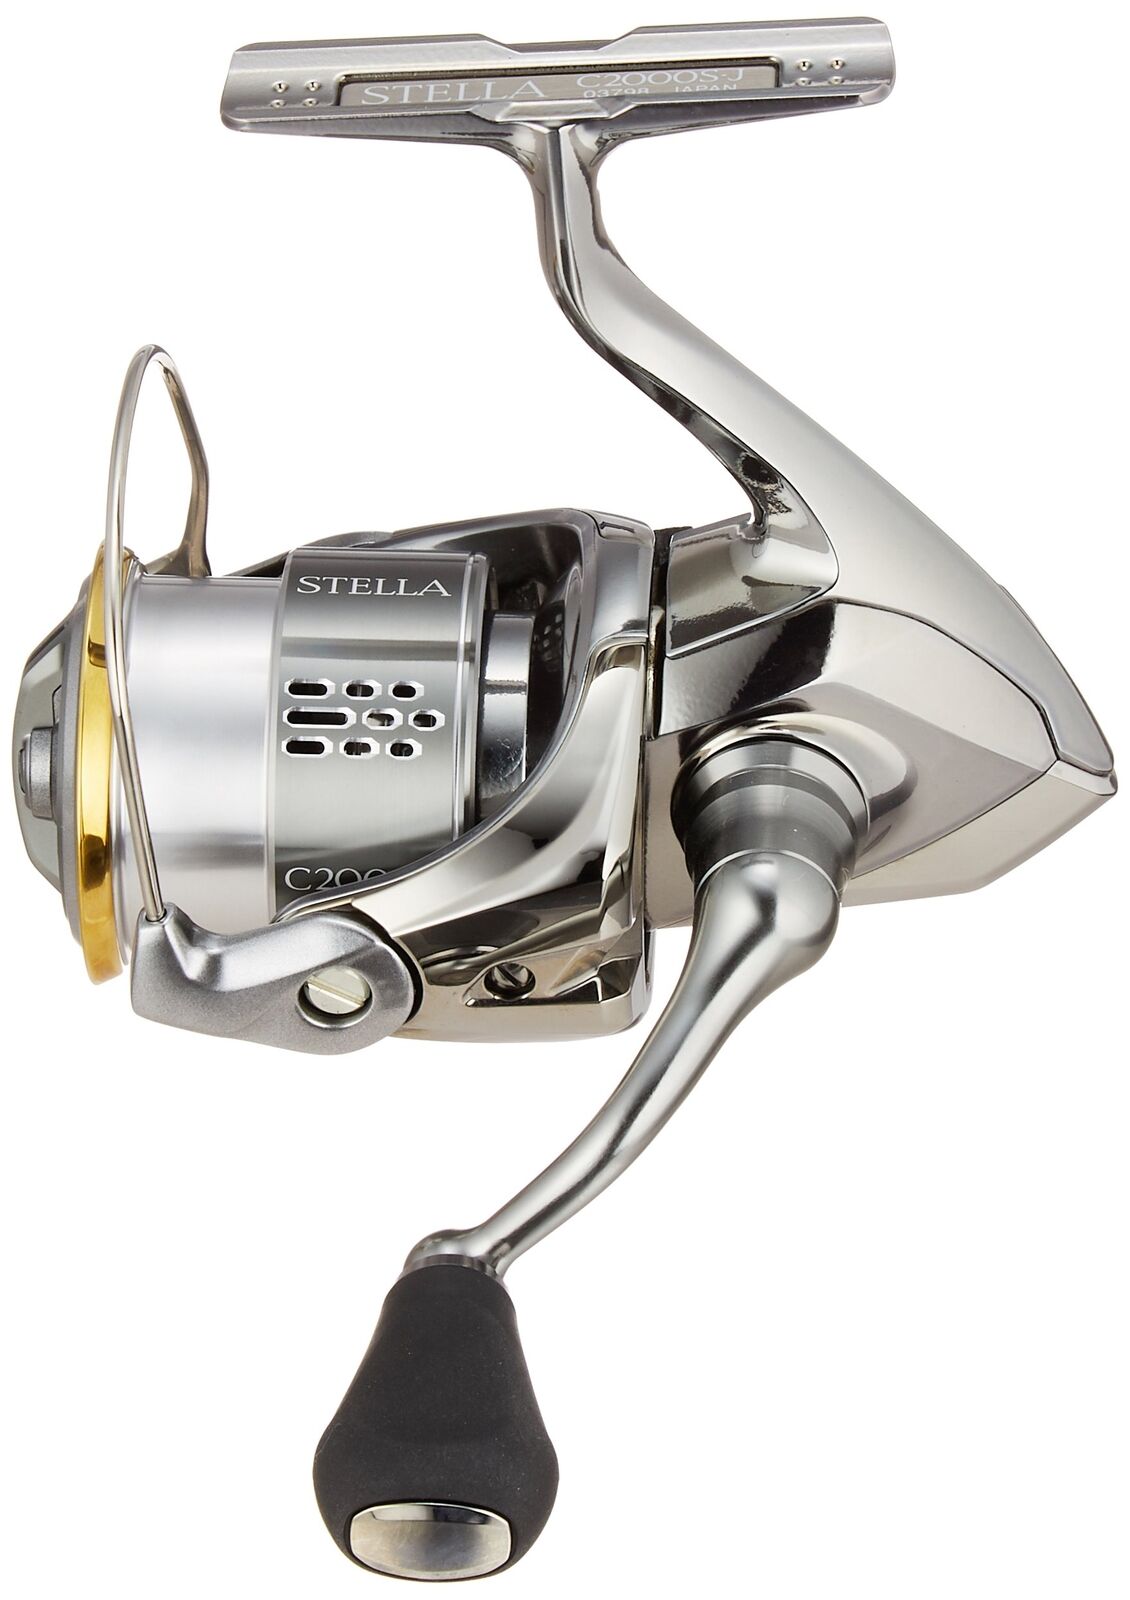 Details about   NEW SHIMANO reel 17 Arutegura C2000S Japan Import 